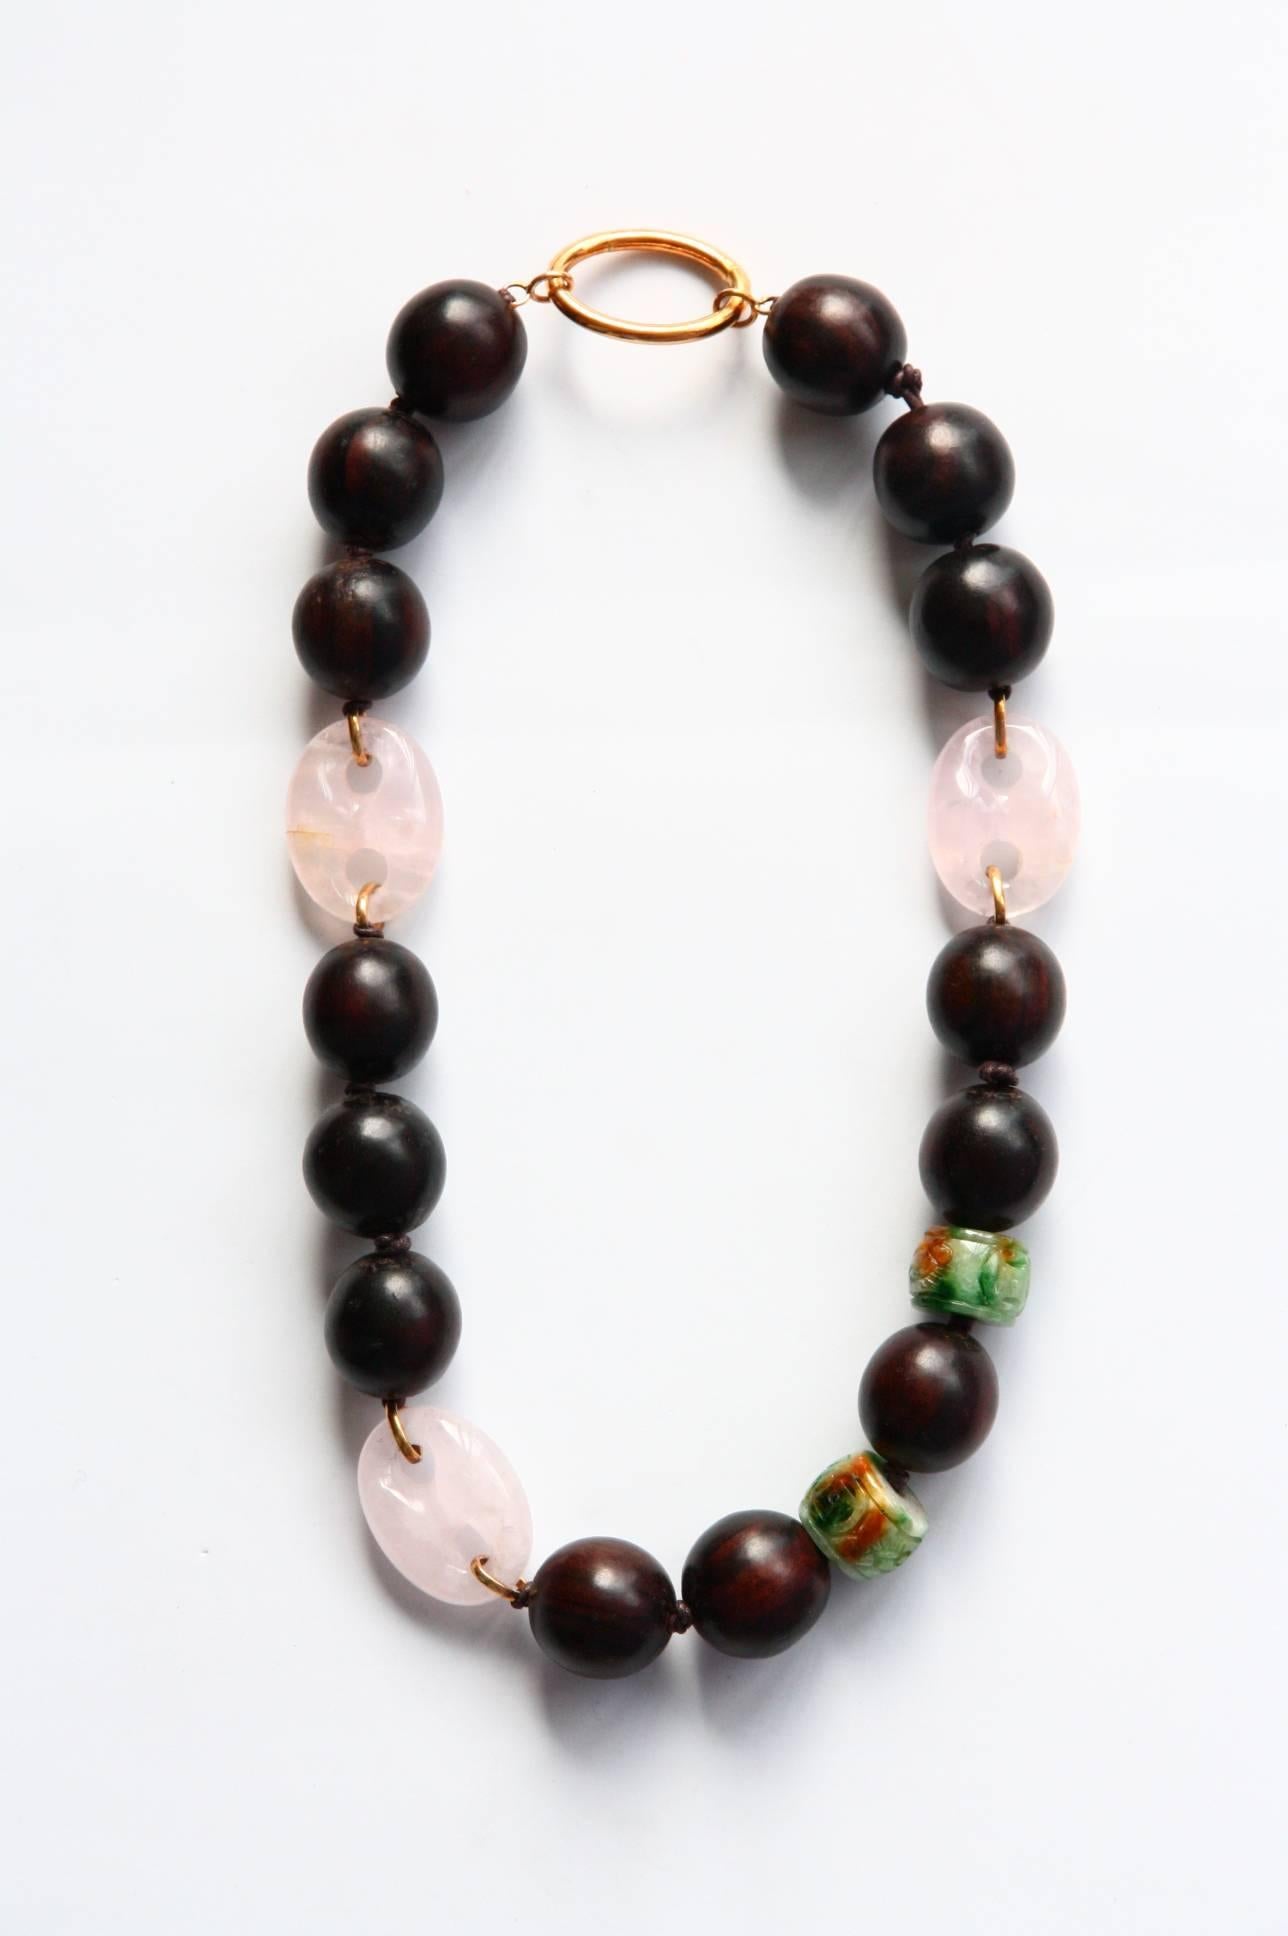 Natural ebony necklace with  rose quartz marine chain carved jade elements linked in gold 18kt gr 12,00.
Total length 58cm.
All Giulia Colussi jewelry is new and has never been previously owned or worn. Each item will arrive at your door beautifully